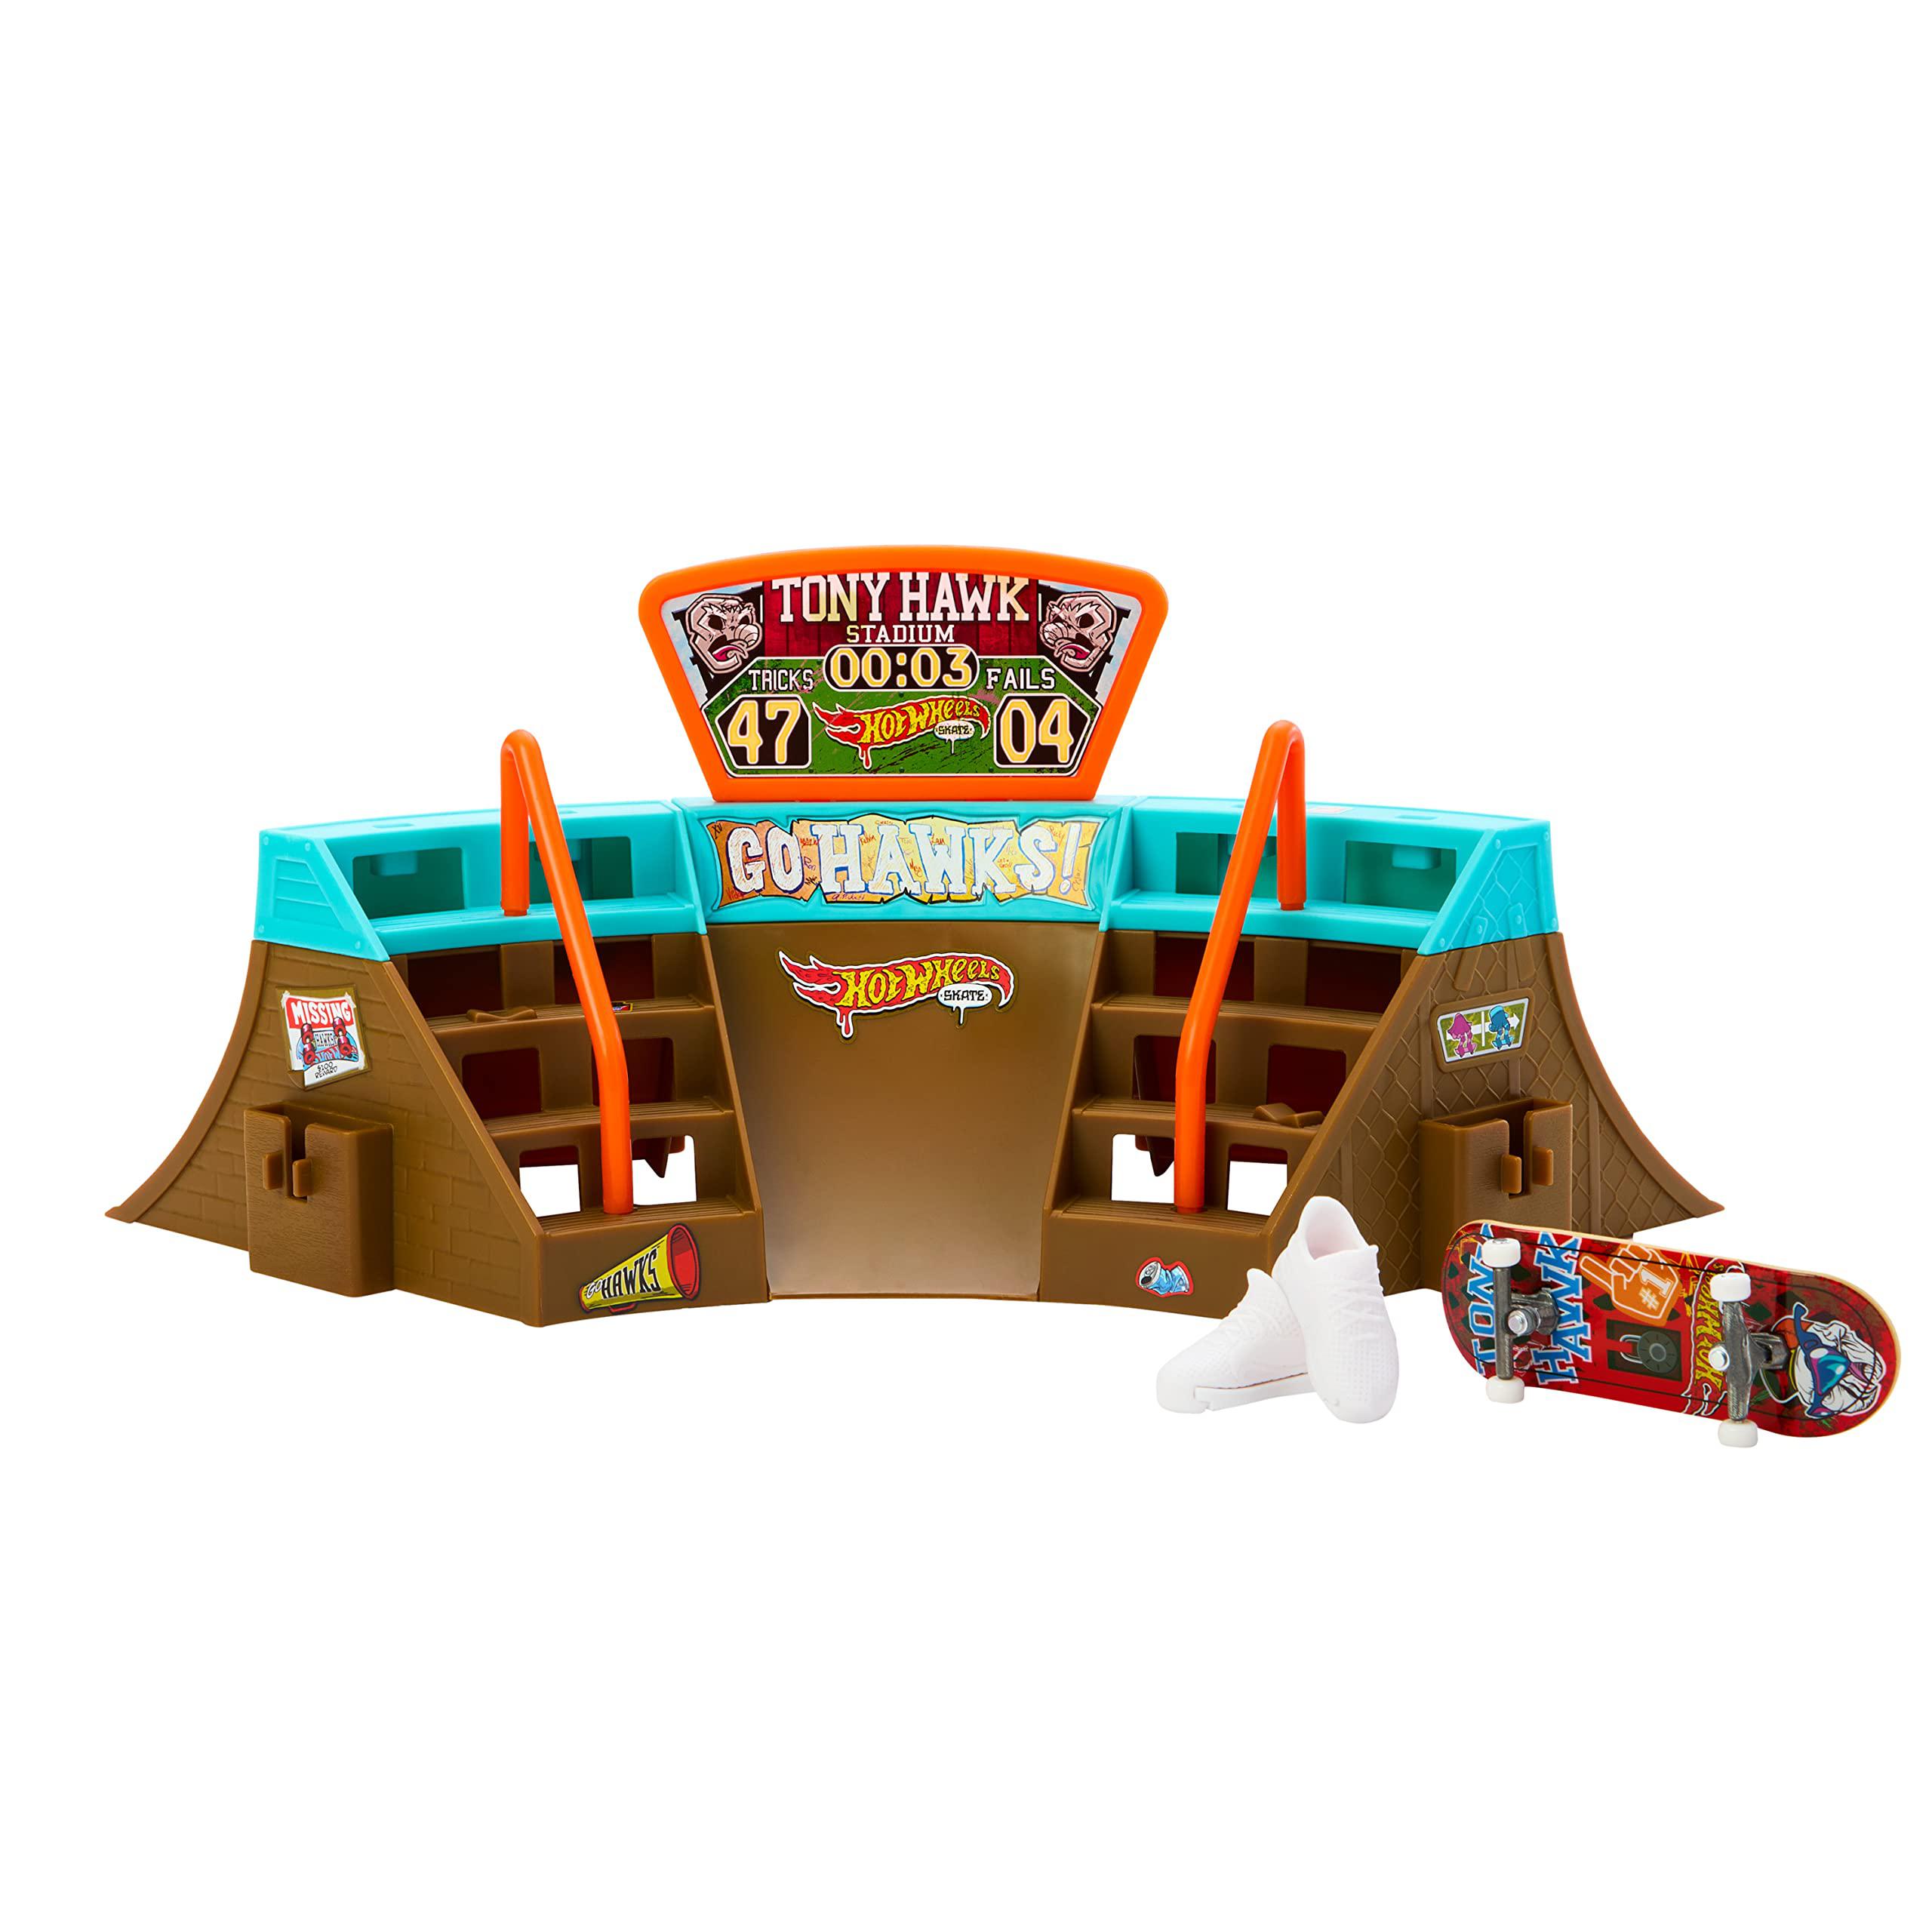 hot wheels skate stadium playset designed with tony hawk, 1 exclusive fingerboard & pair of skate shoes, with storage